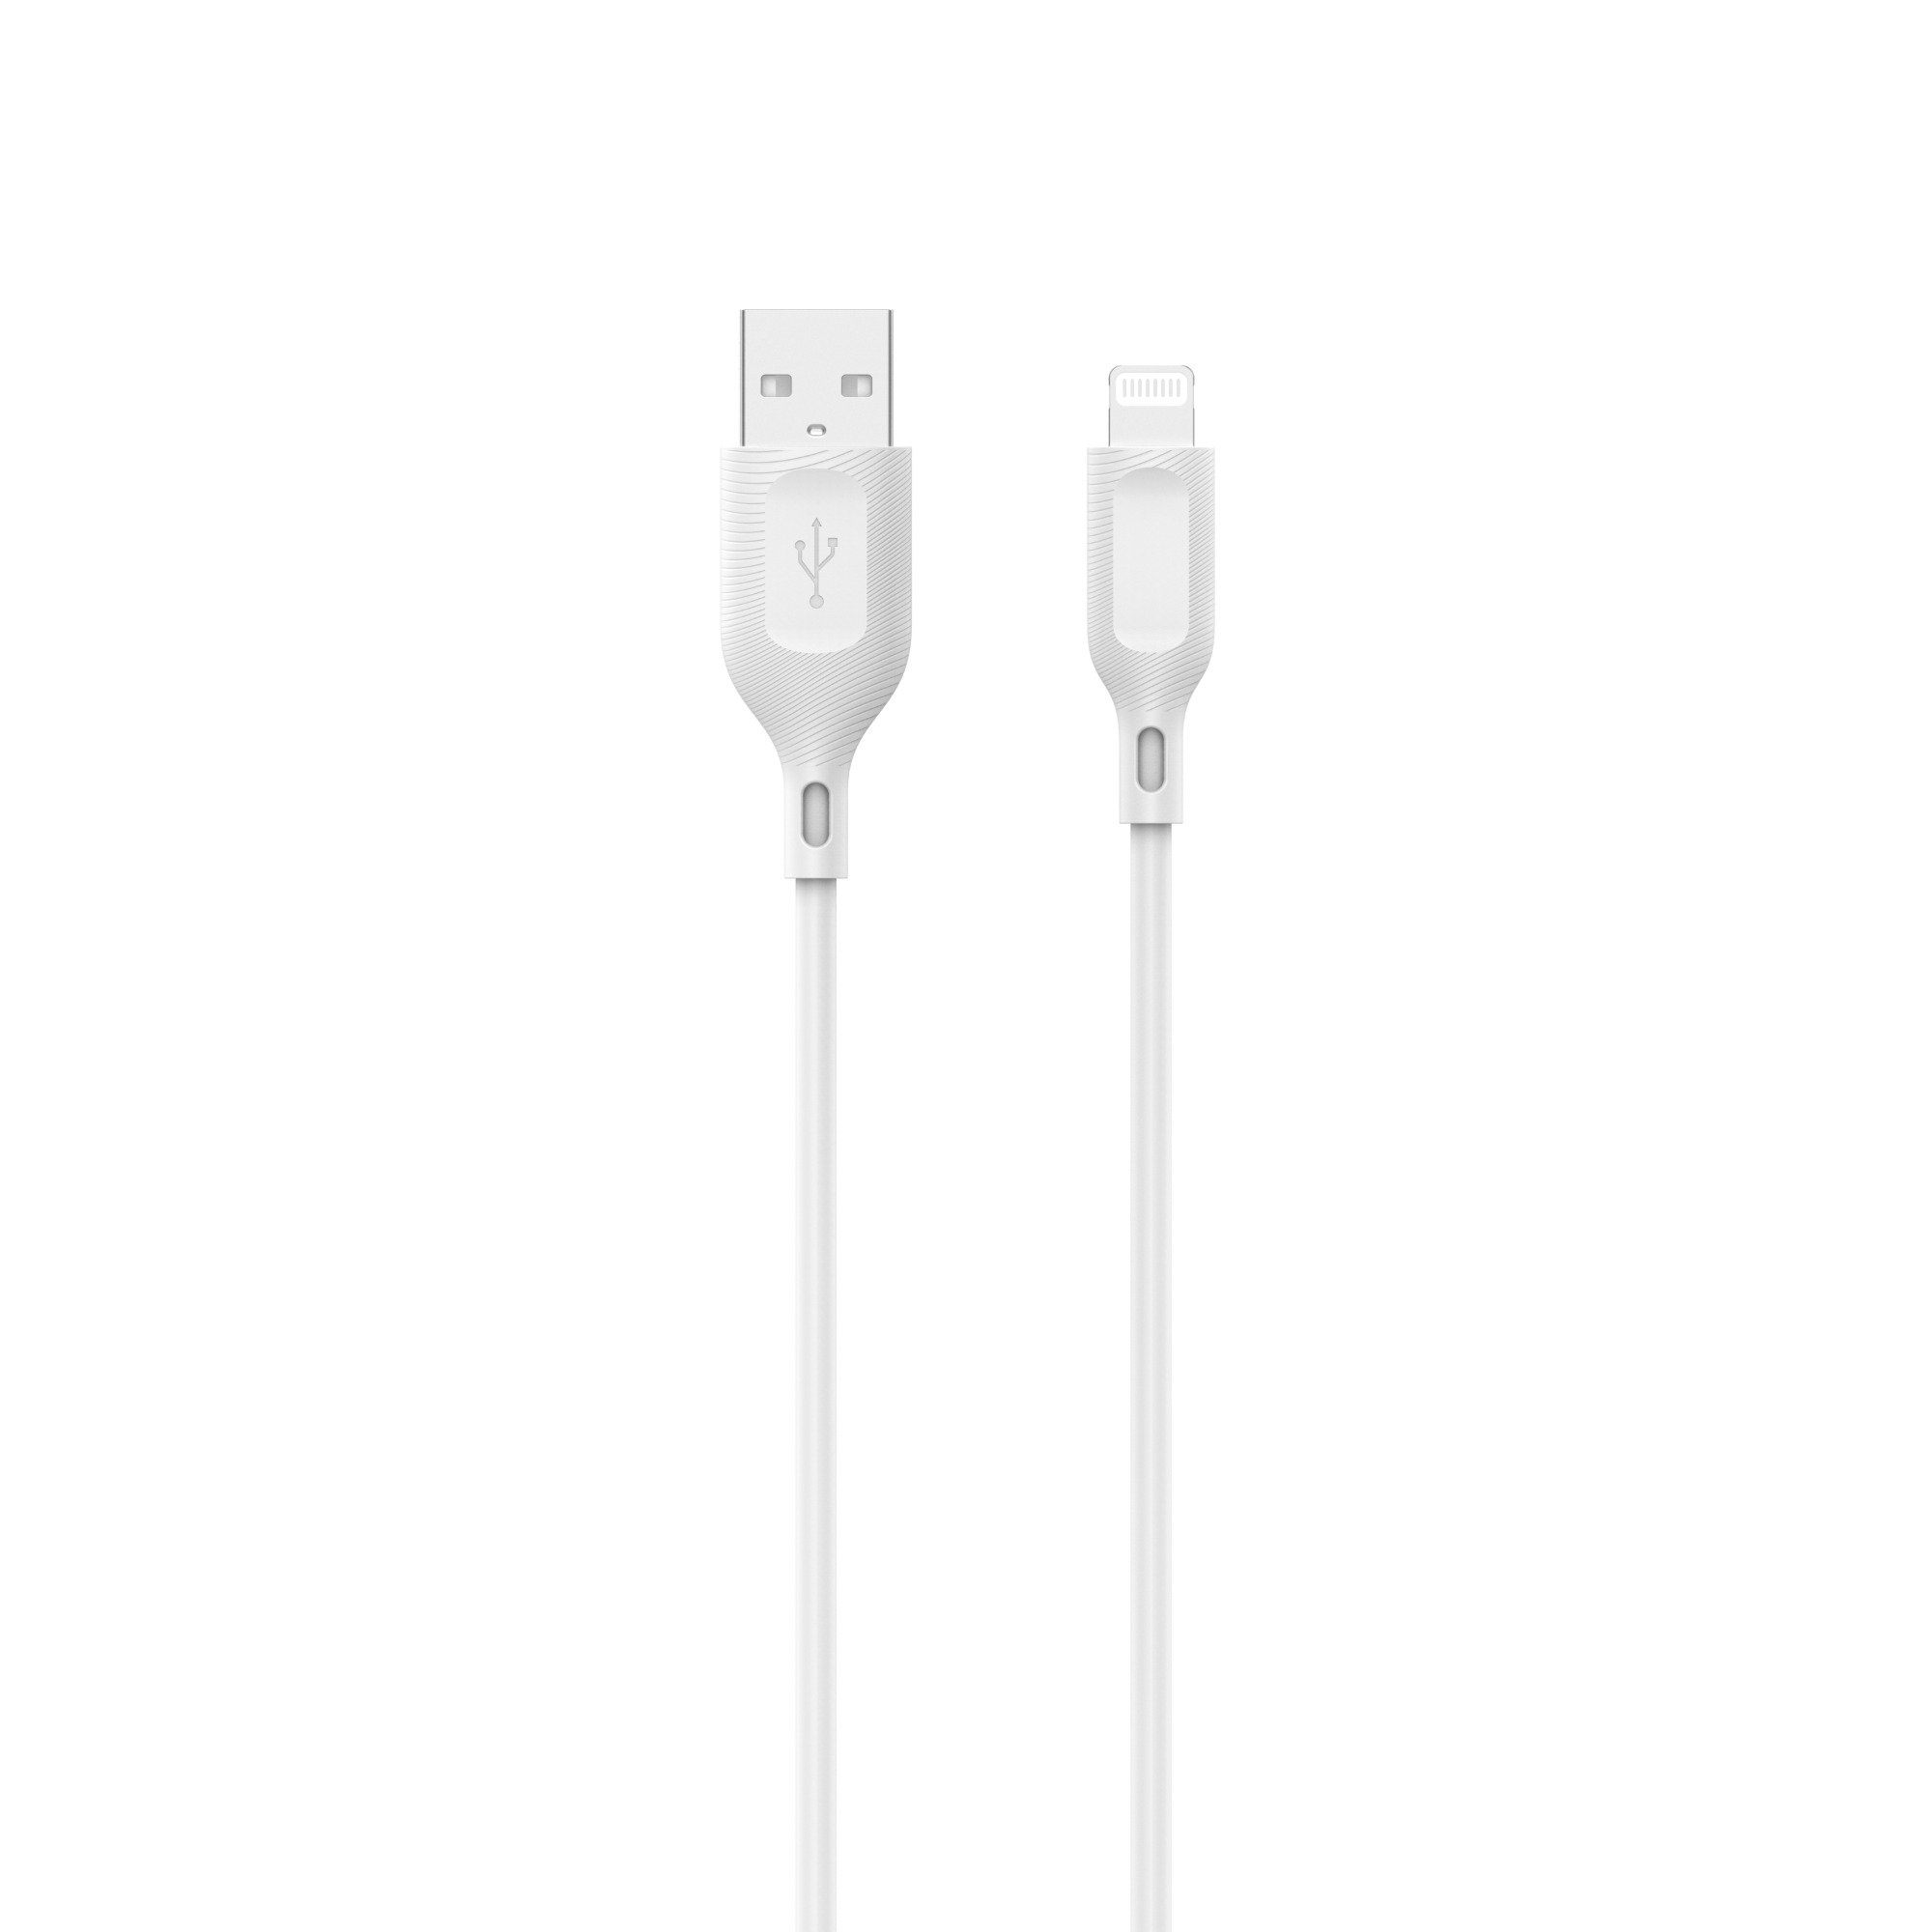 USB A to Lightning charge and sync cable, 1M